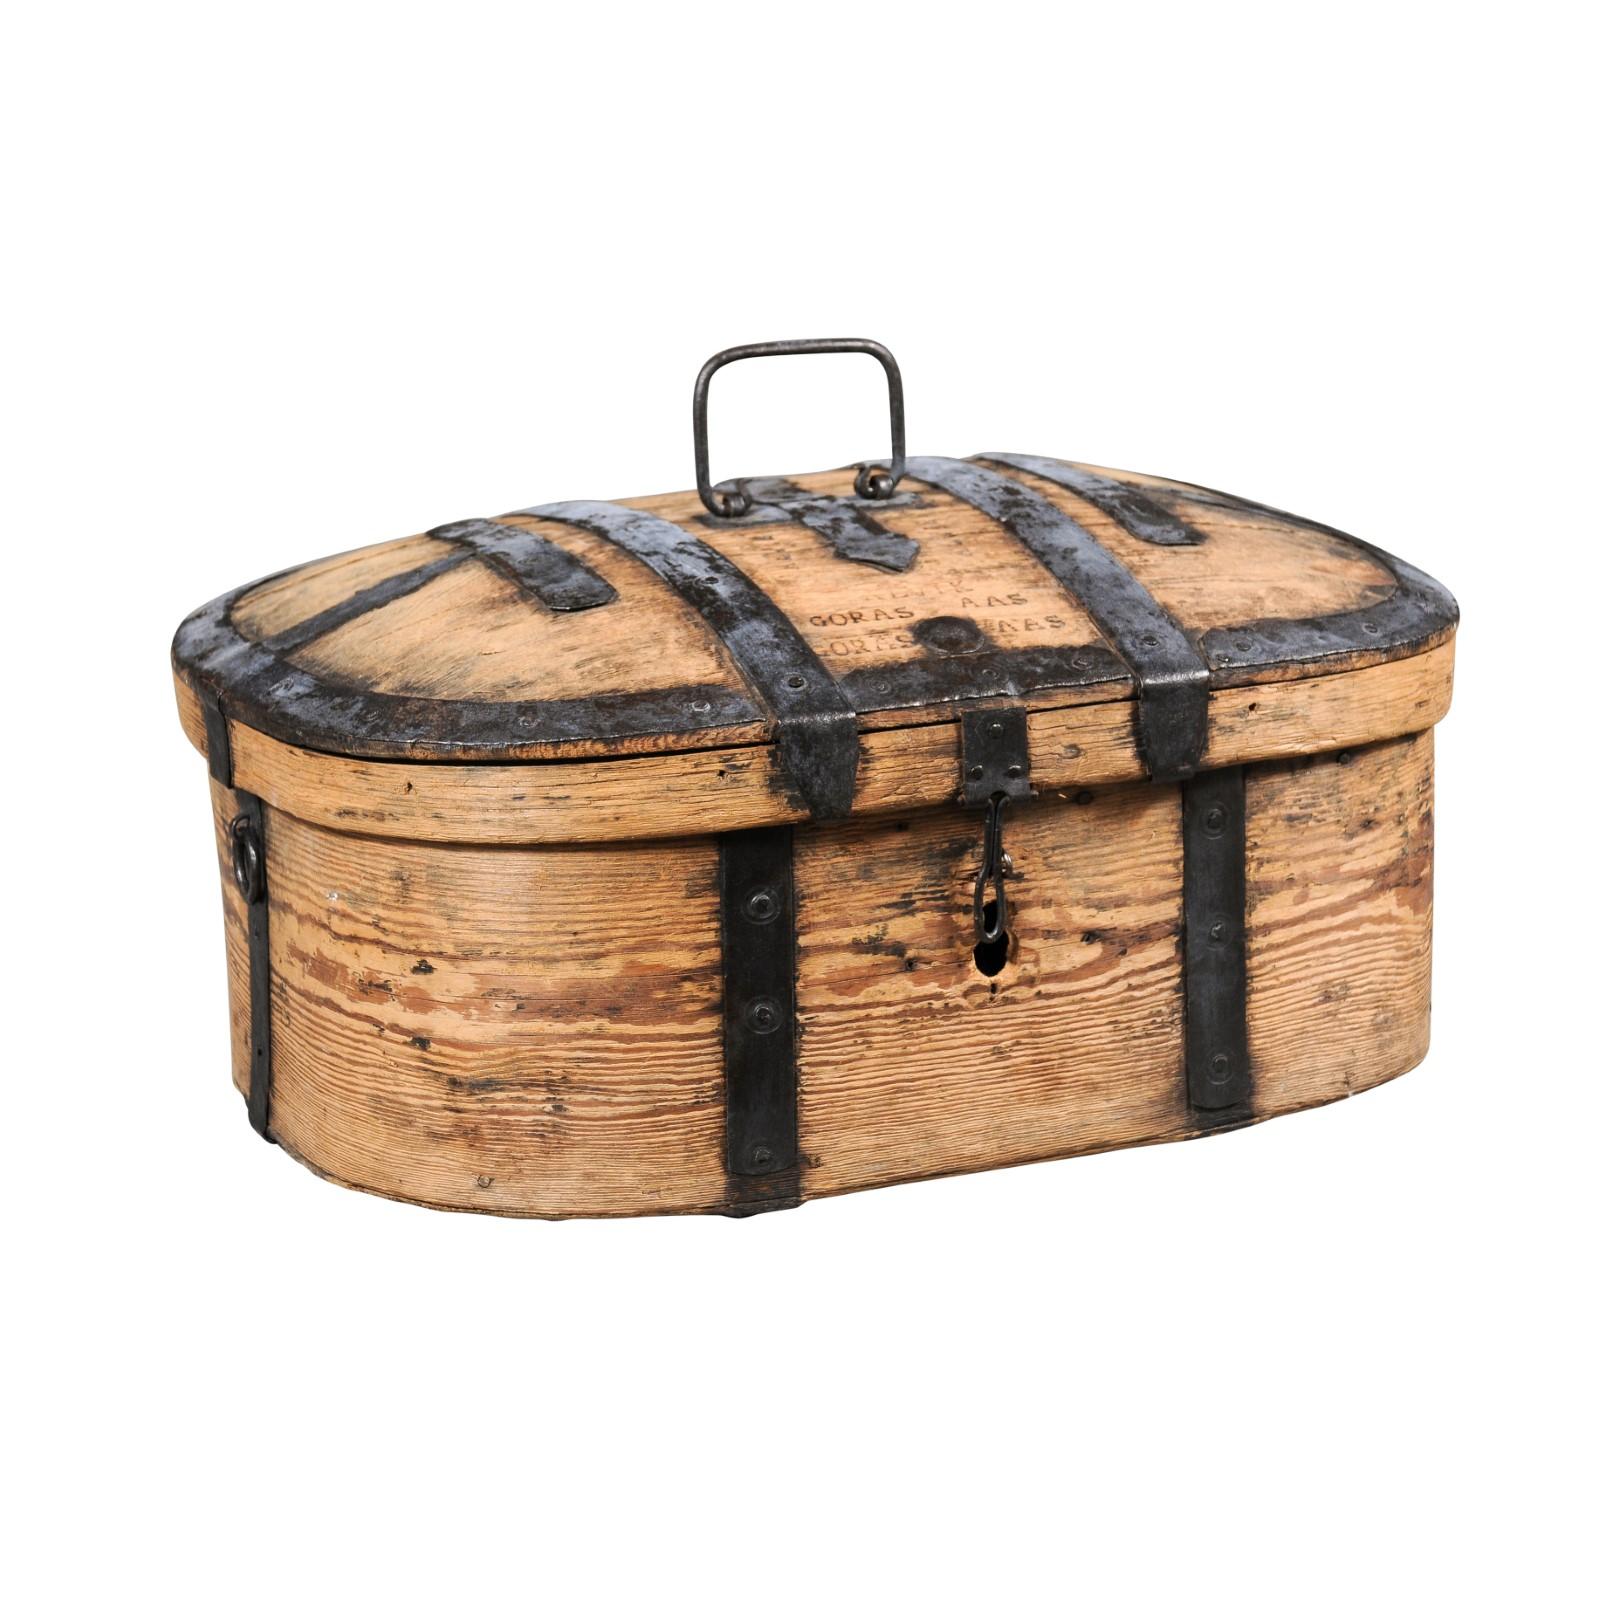 A rustic Swedish wooden box from the late 18th century, with iron accents and natural patina. Created in Sweden during the last decade of the 18th century, this wooden box charms us with its rustic appeal and distressed appearance. Showcasing an